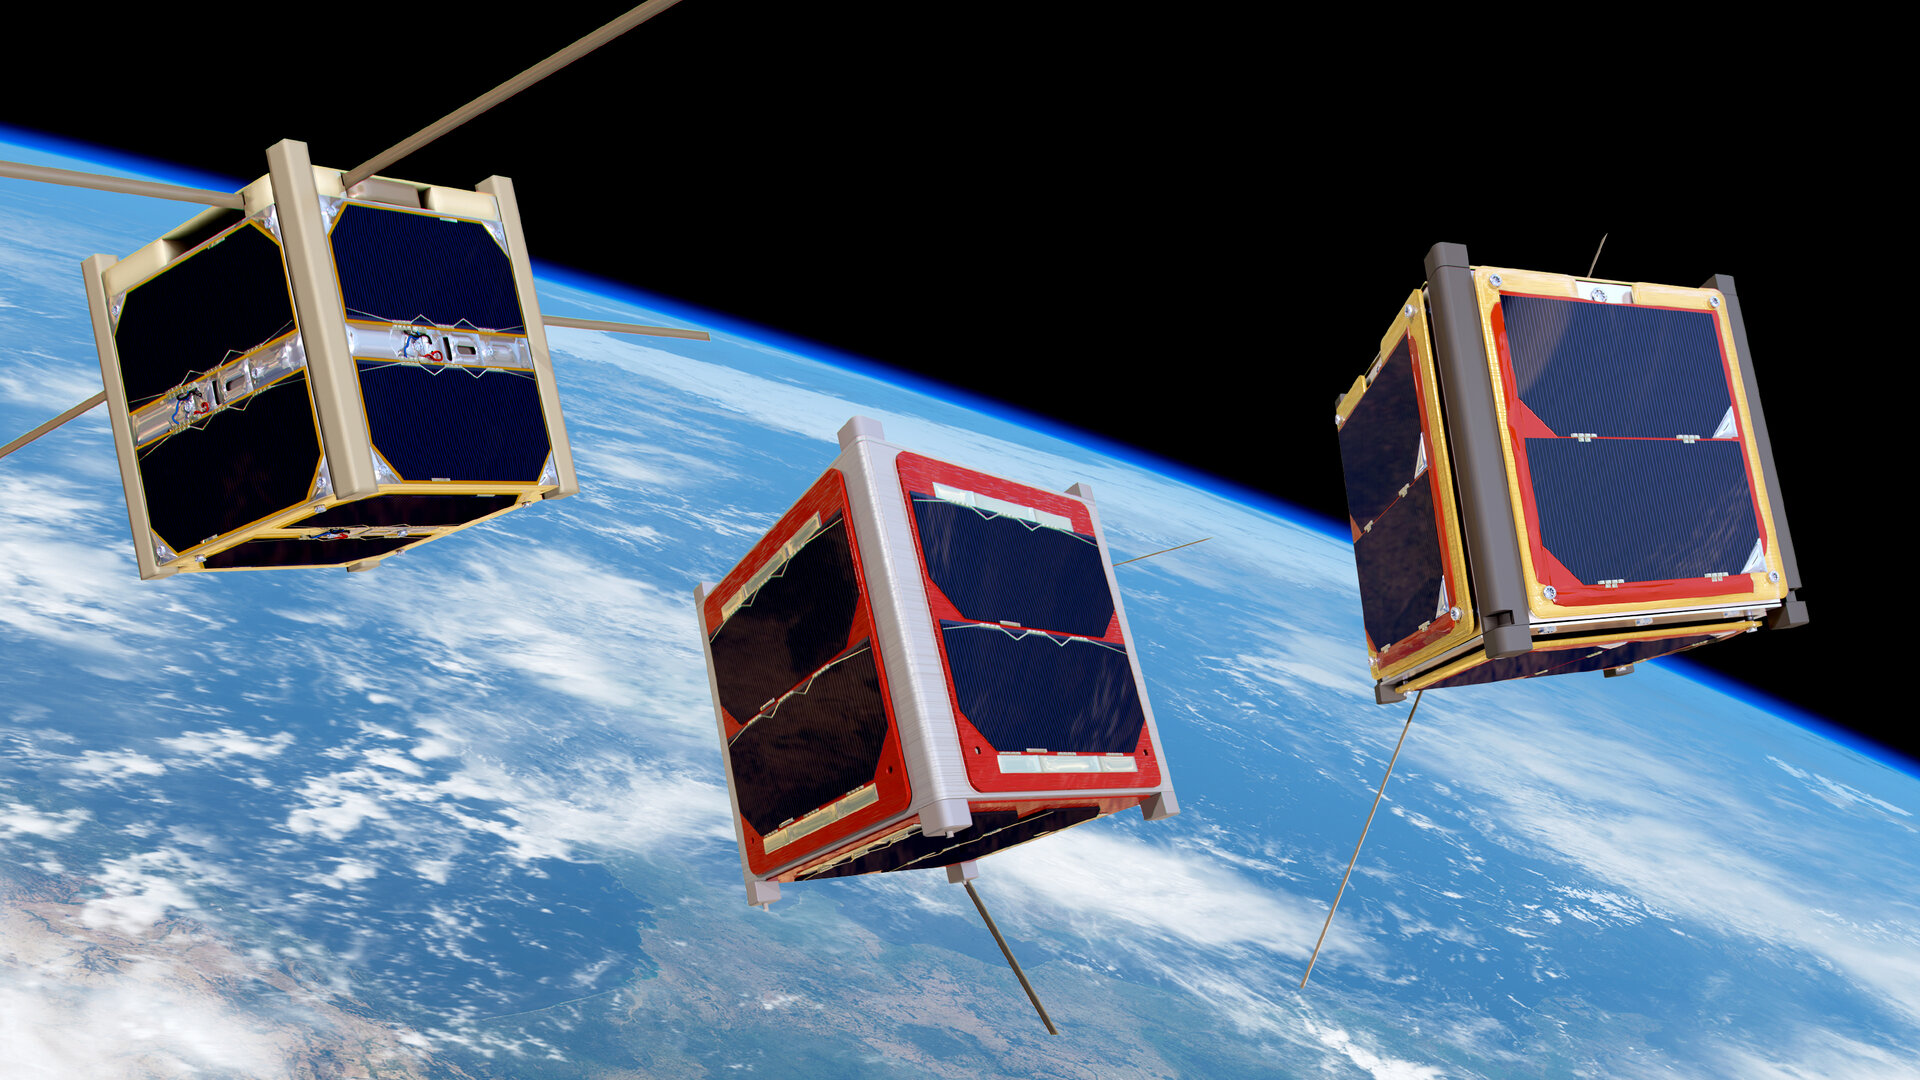 CubeSats are integral to the Fly Your Satellite! programme